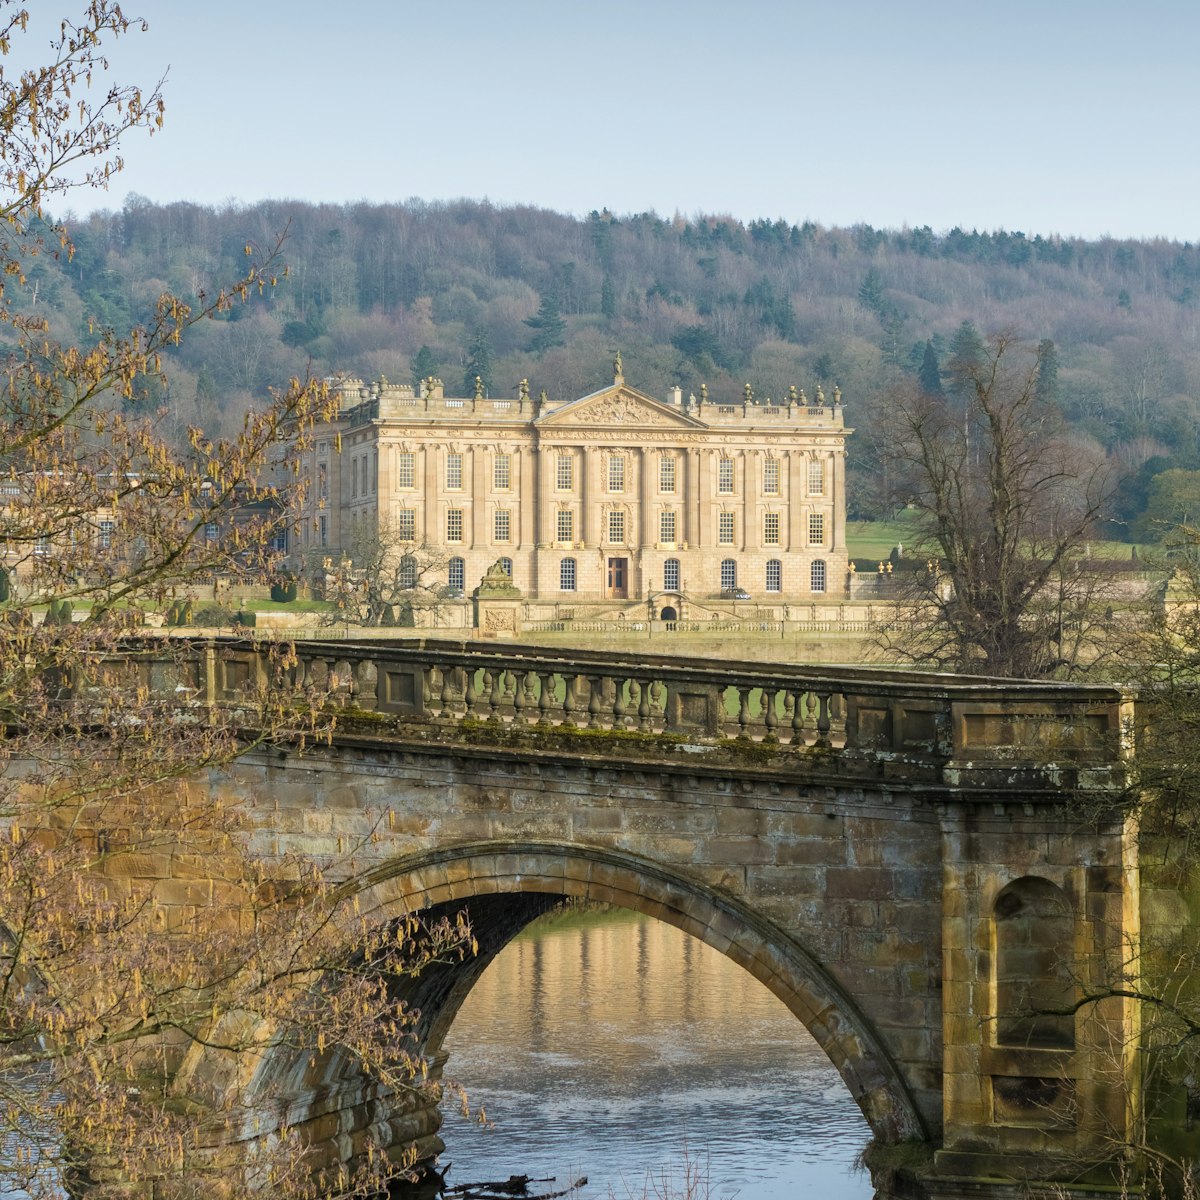 MARCH 15, 2016: Chatsworth House reflected in a lake in Derbyshire.